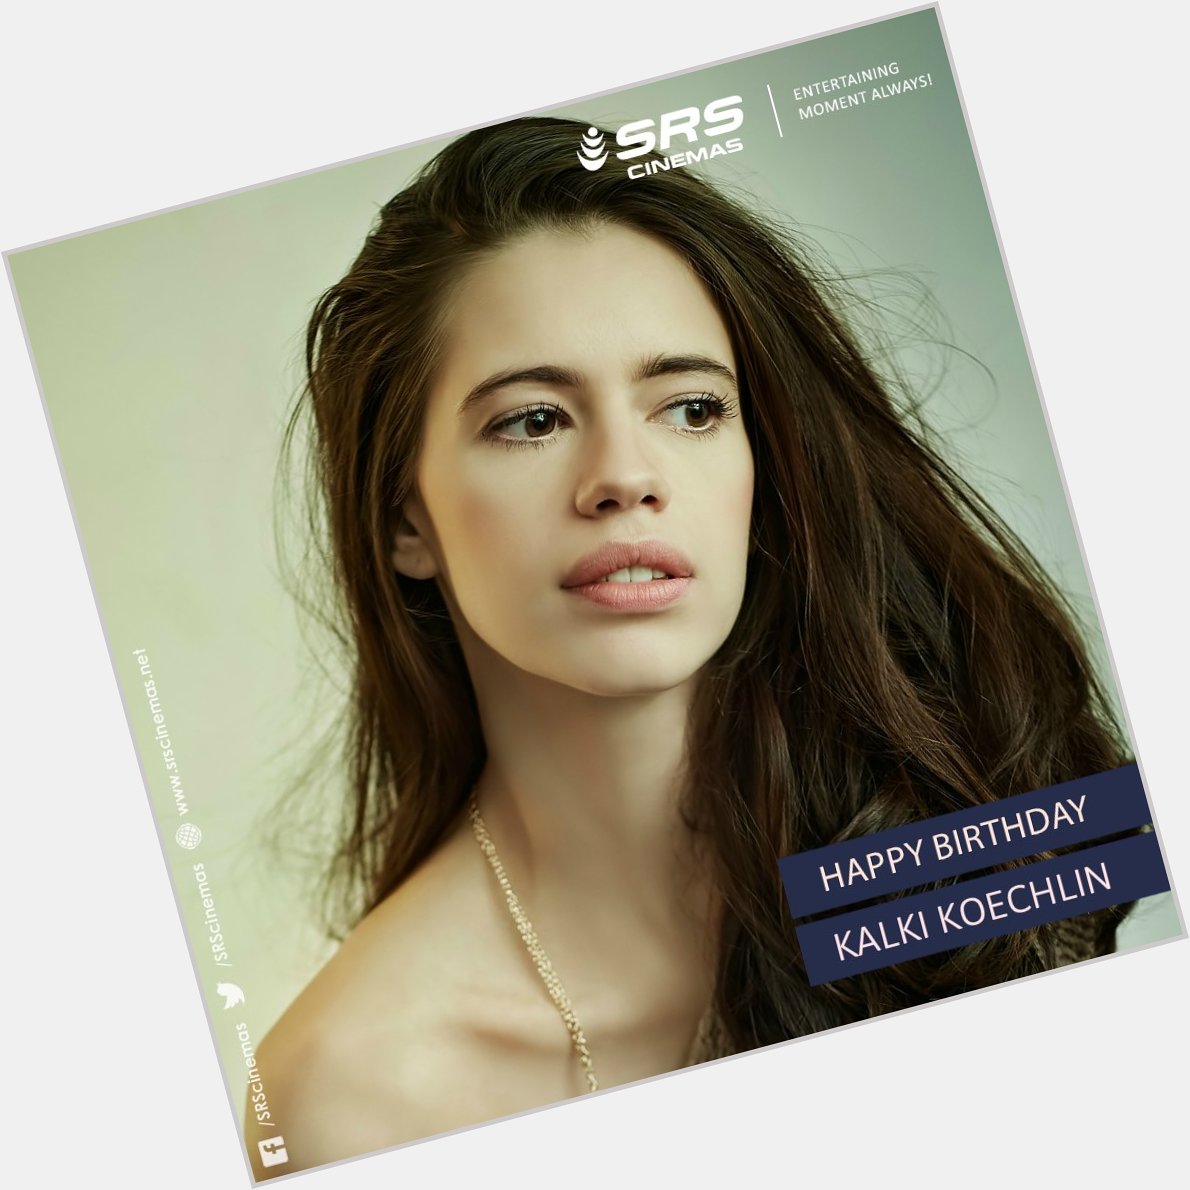 Wishing the gorgeous and talented, Kalki Koechlin a very happy birthday. 